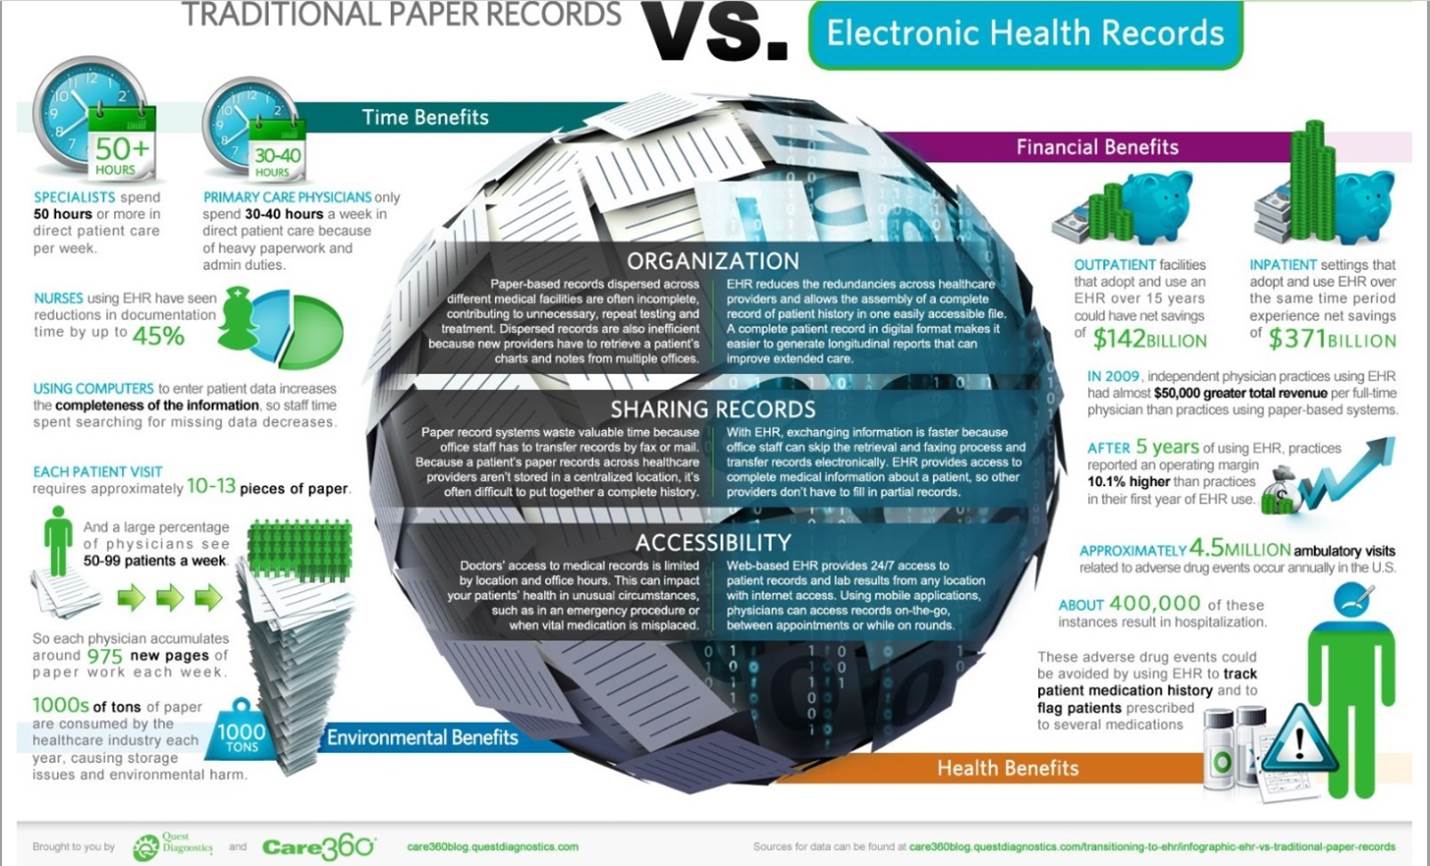 Traditional Paper Records vs. Electronic Health Records